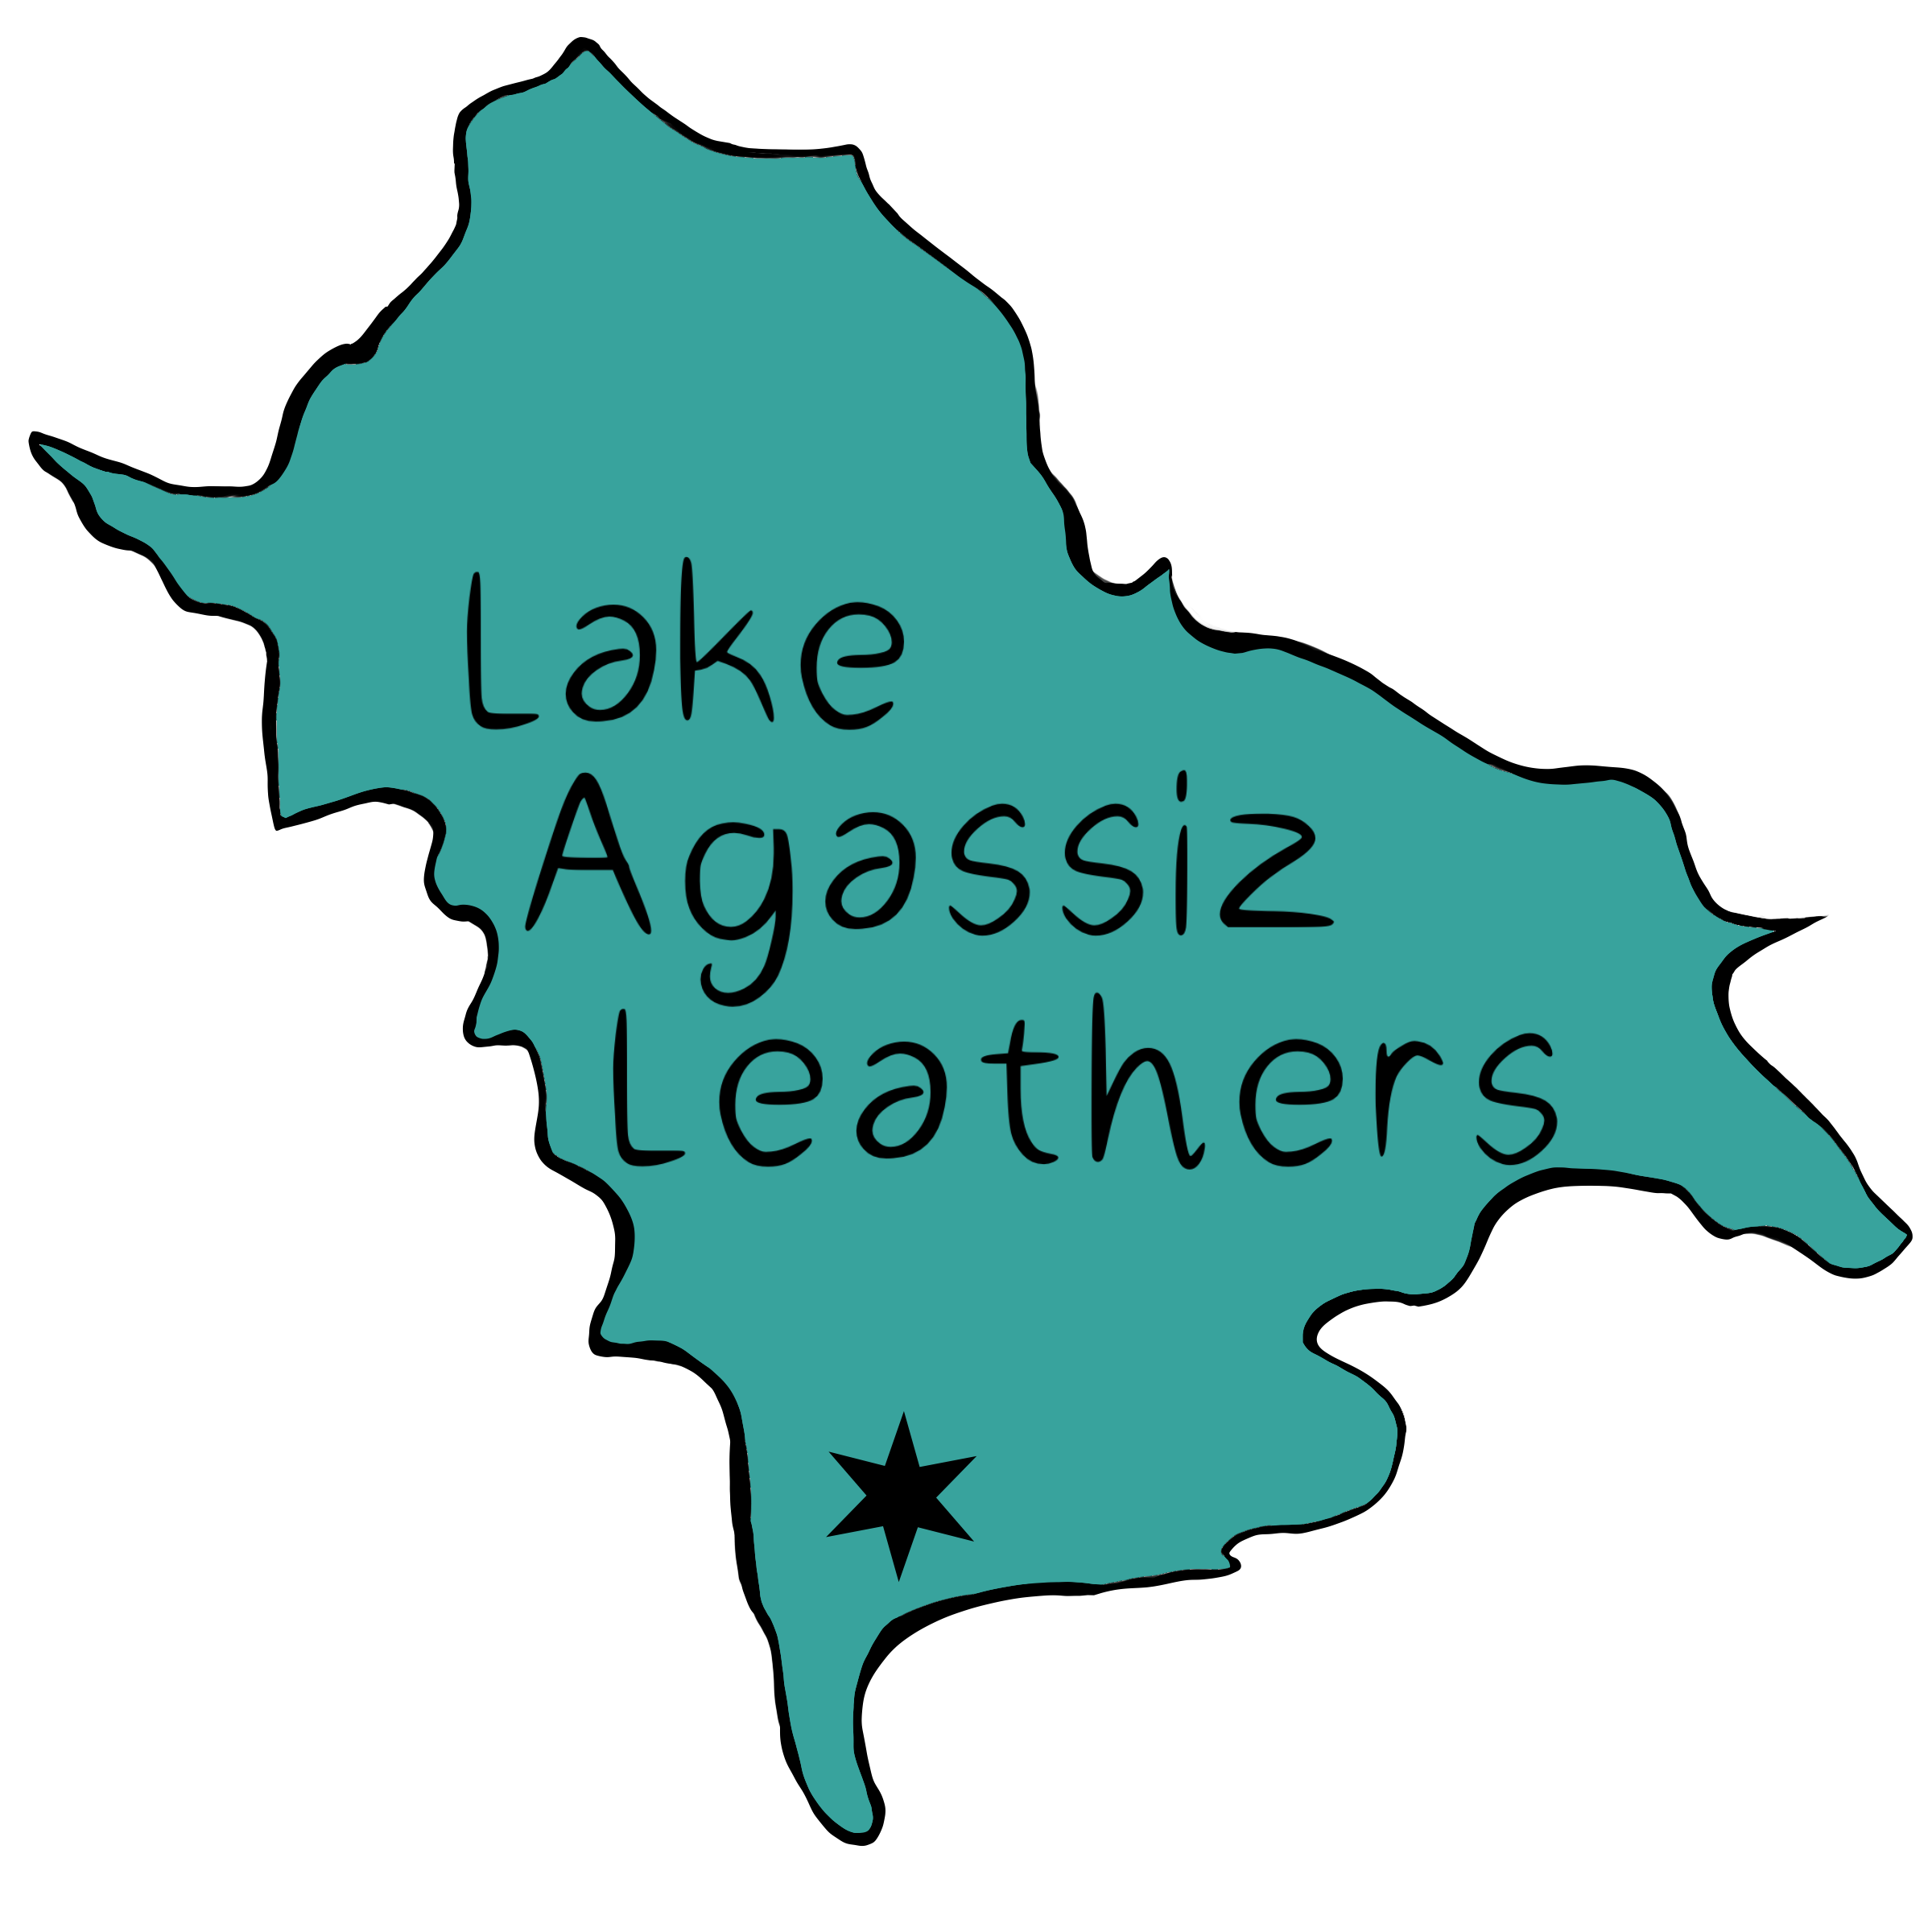 Company logo is the shape of Lake Agassiz with a star in the lower left hand part of the lake representing the farm that the artist grew up on. The name Lake Agassiz Leathers is also printed in the center of the lake.